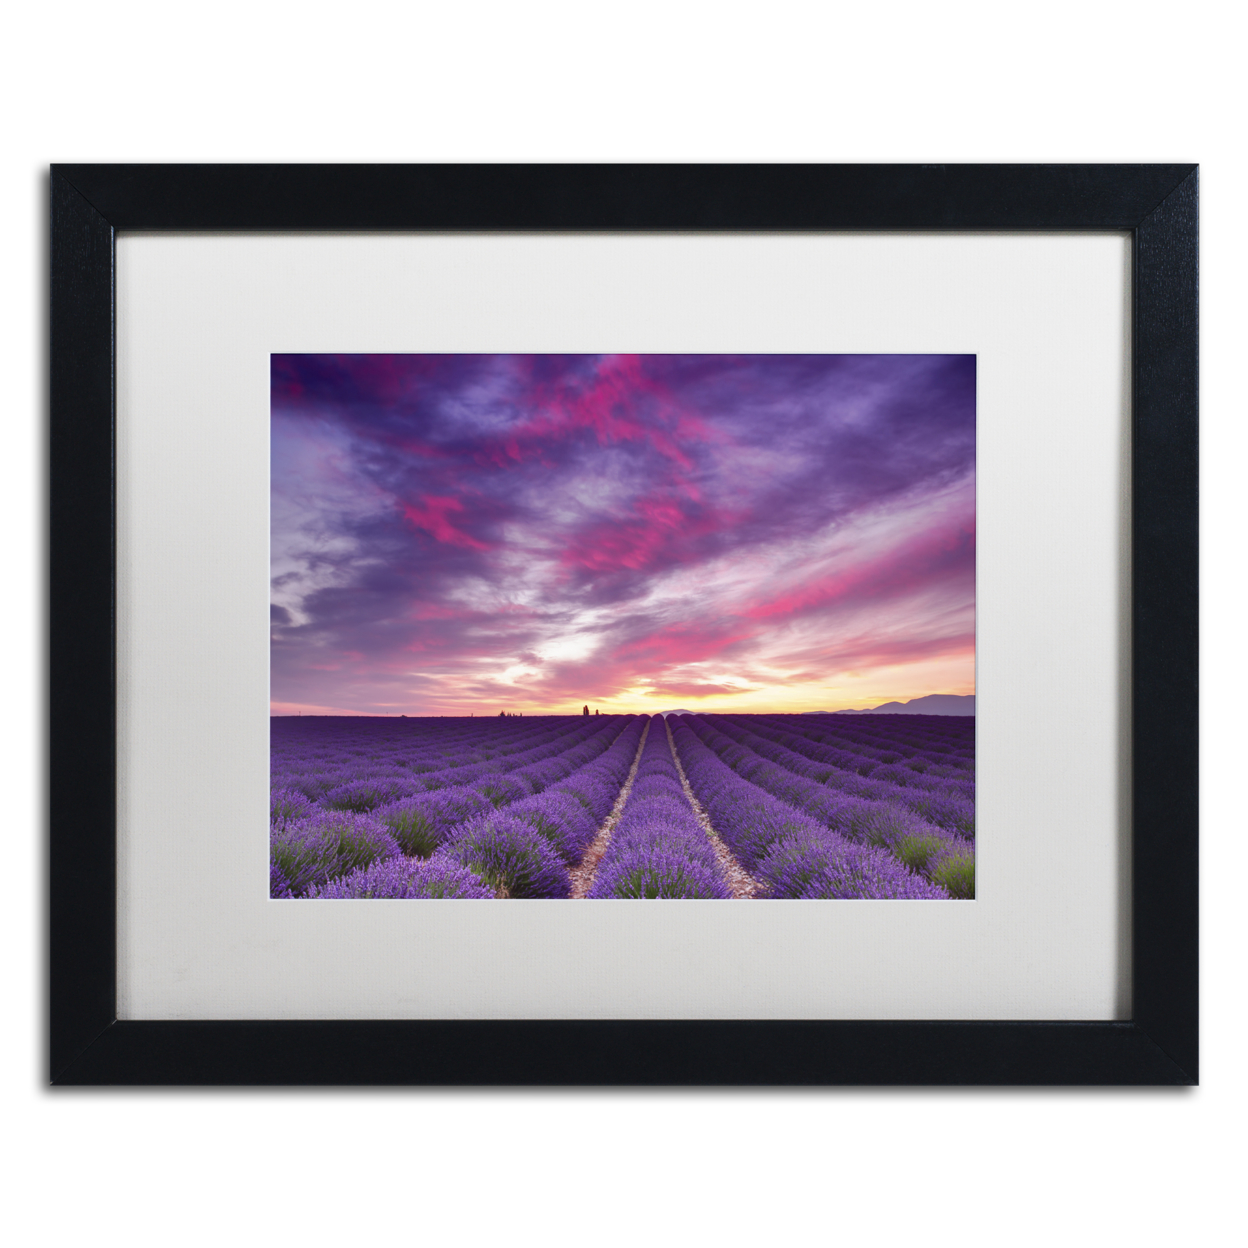 Michael Blanchette Photography 'Pink And Purple' Black Wooden Framed Art 18 X 22 Inches